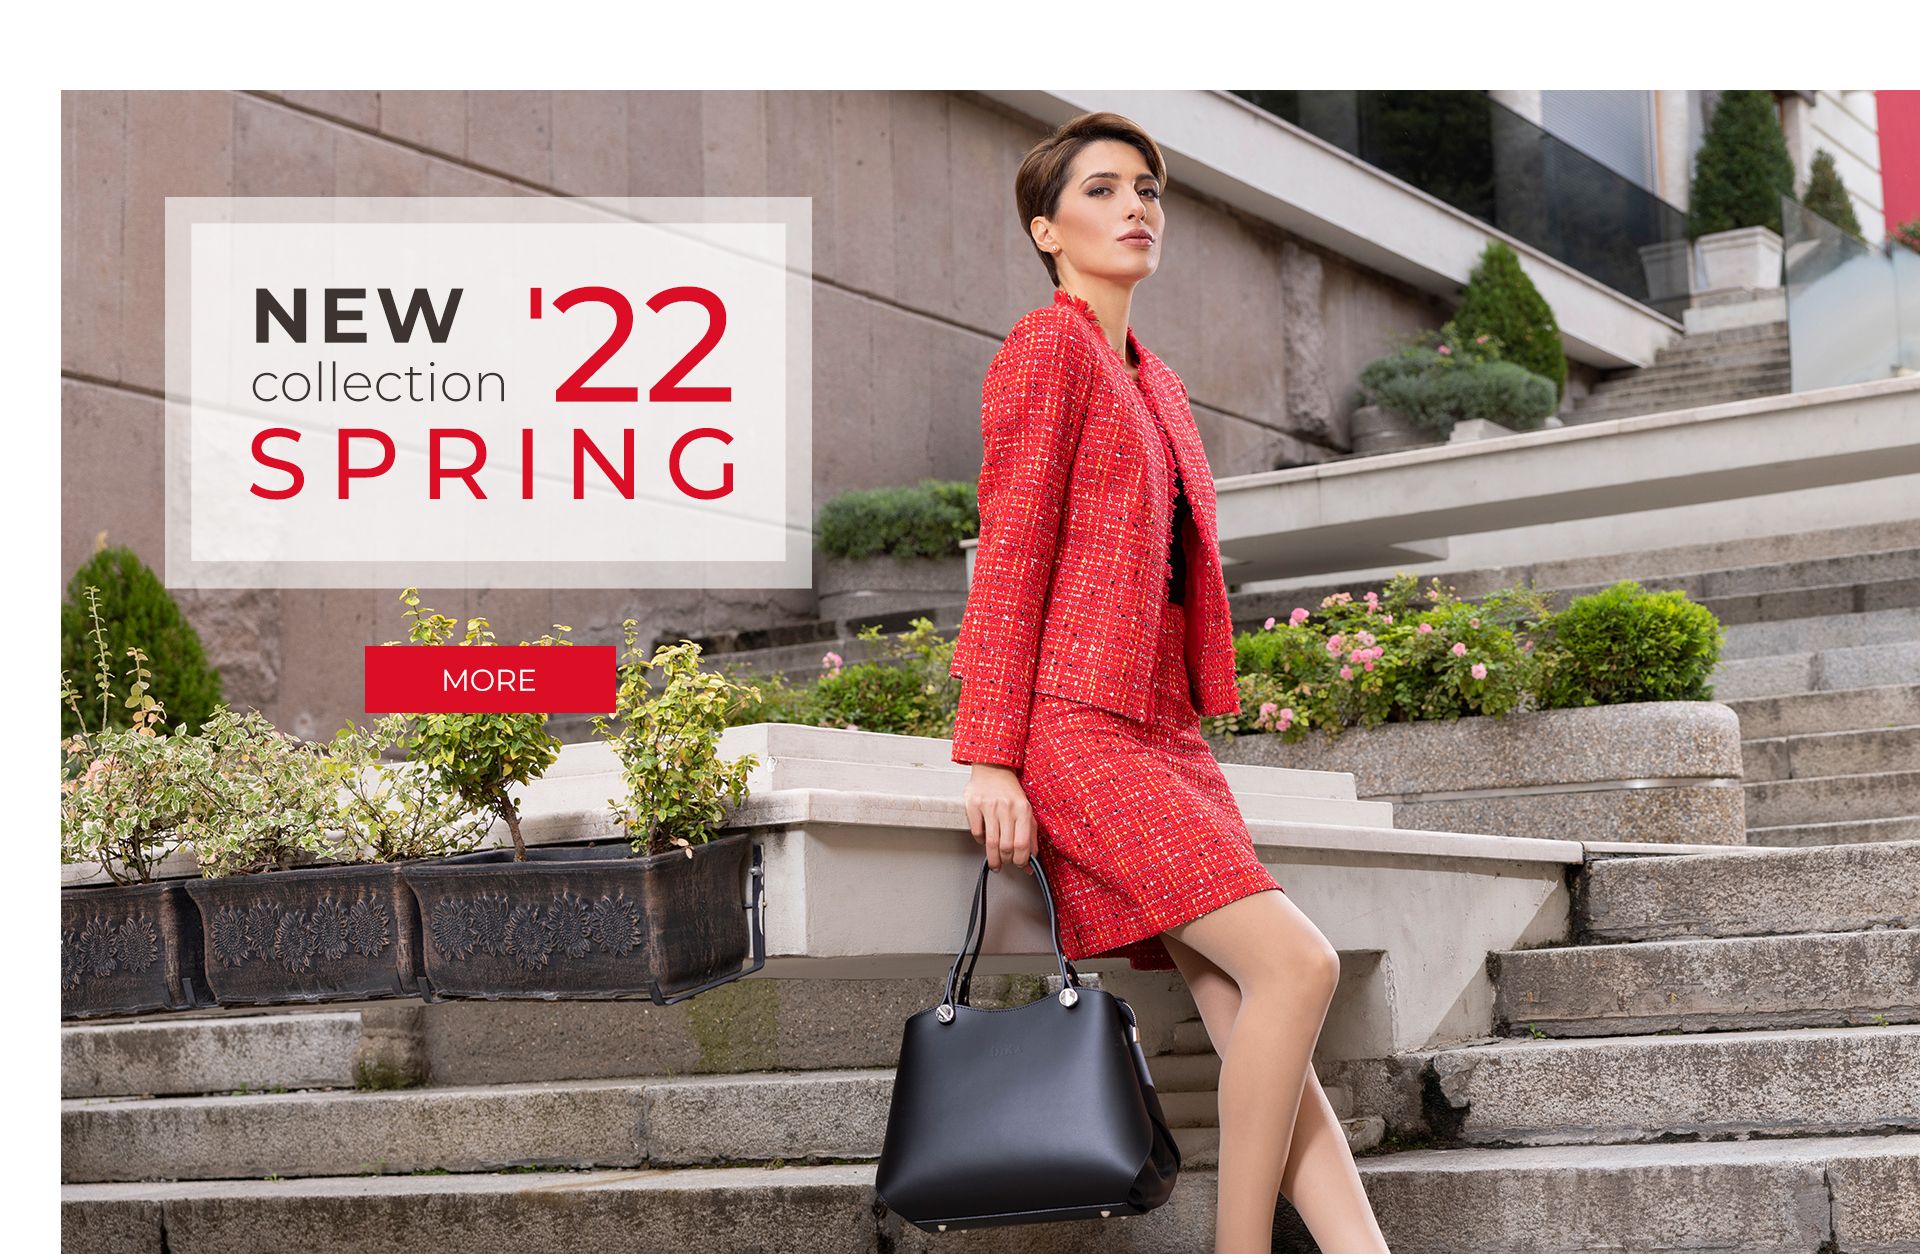 33New Collection Spring